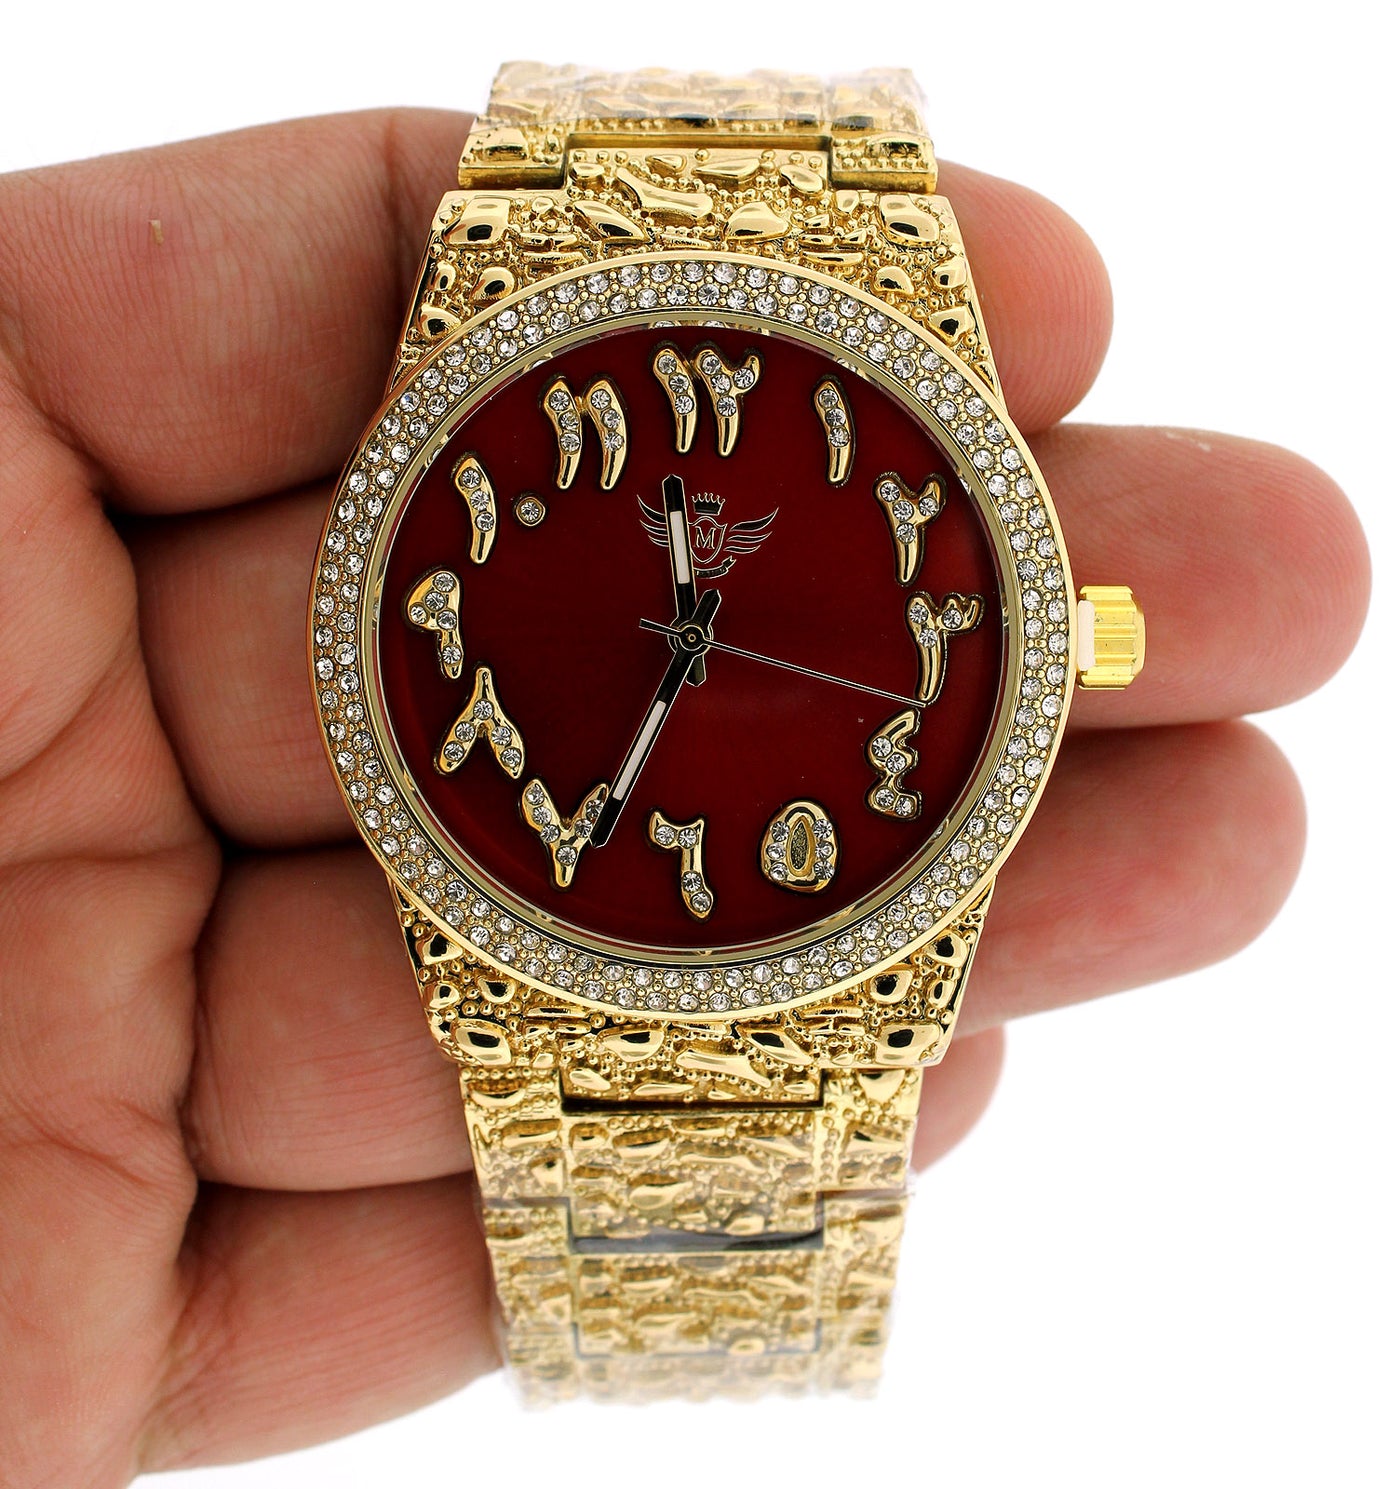 14K Gold Plated Nugget Watch Real Mens Iced CZ Hip Hop Red Arabic Dial